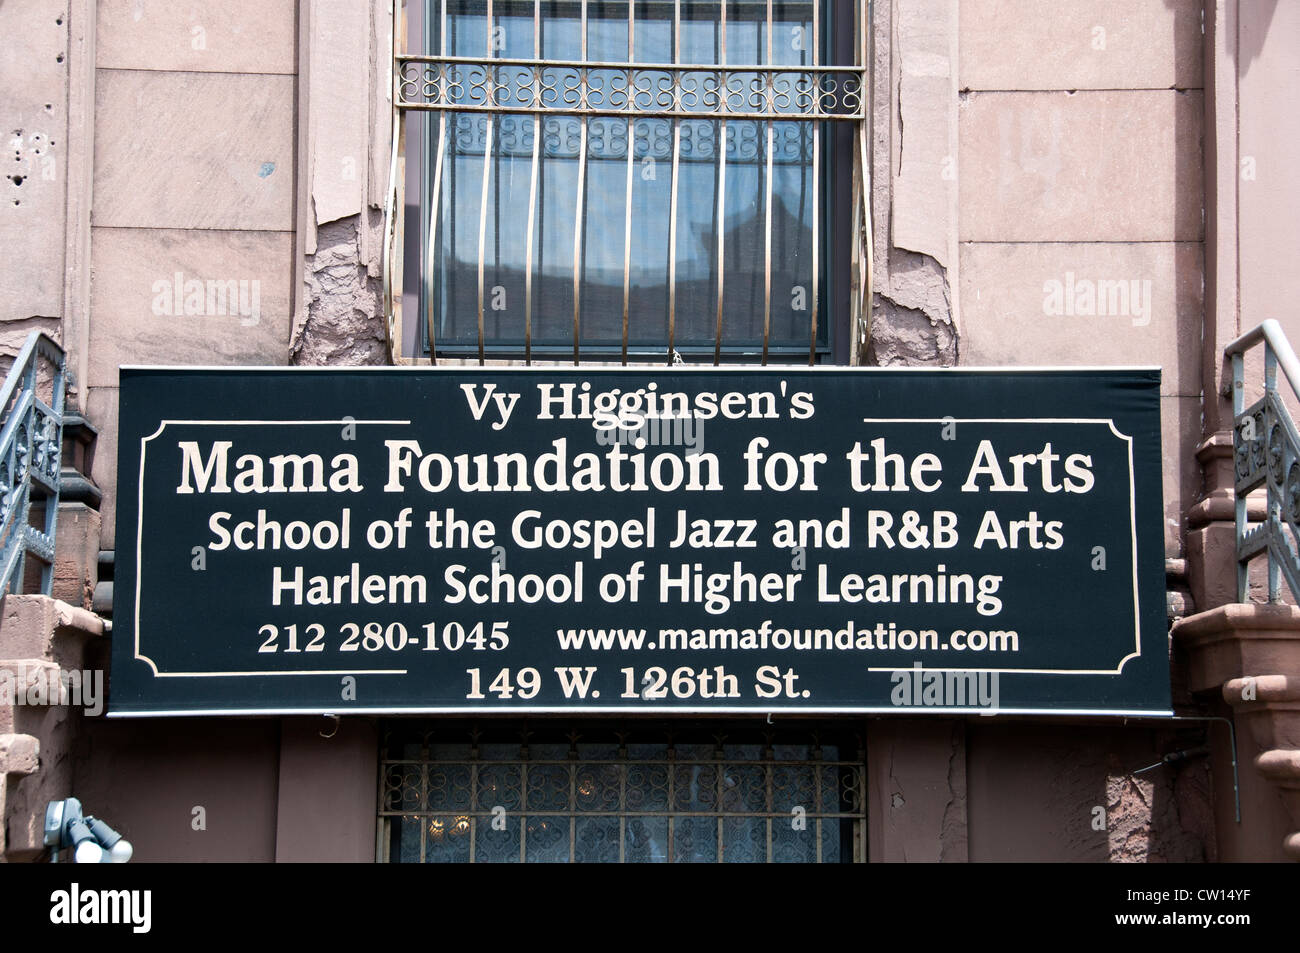 Vy Higginsen Mama's Foundation for the arts school pour R&B Jazz Gospel Harlem New York Manhattan United States Banque D'Images